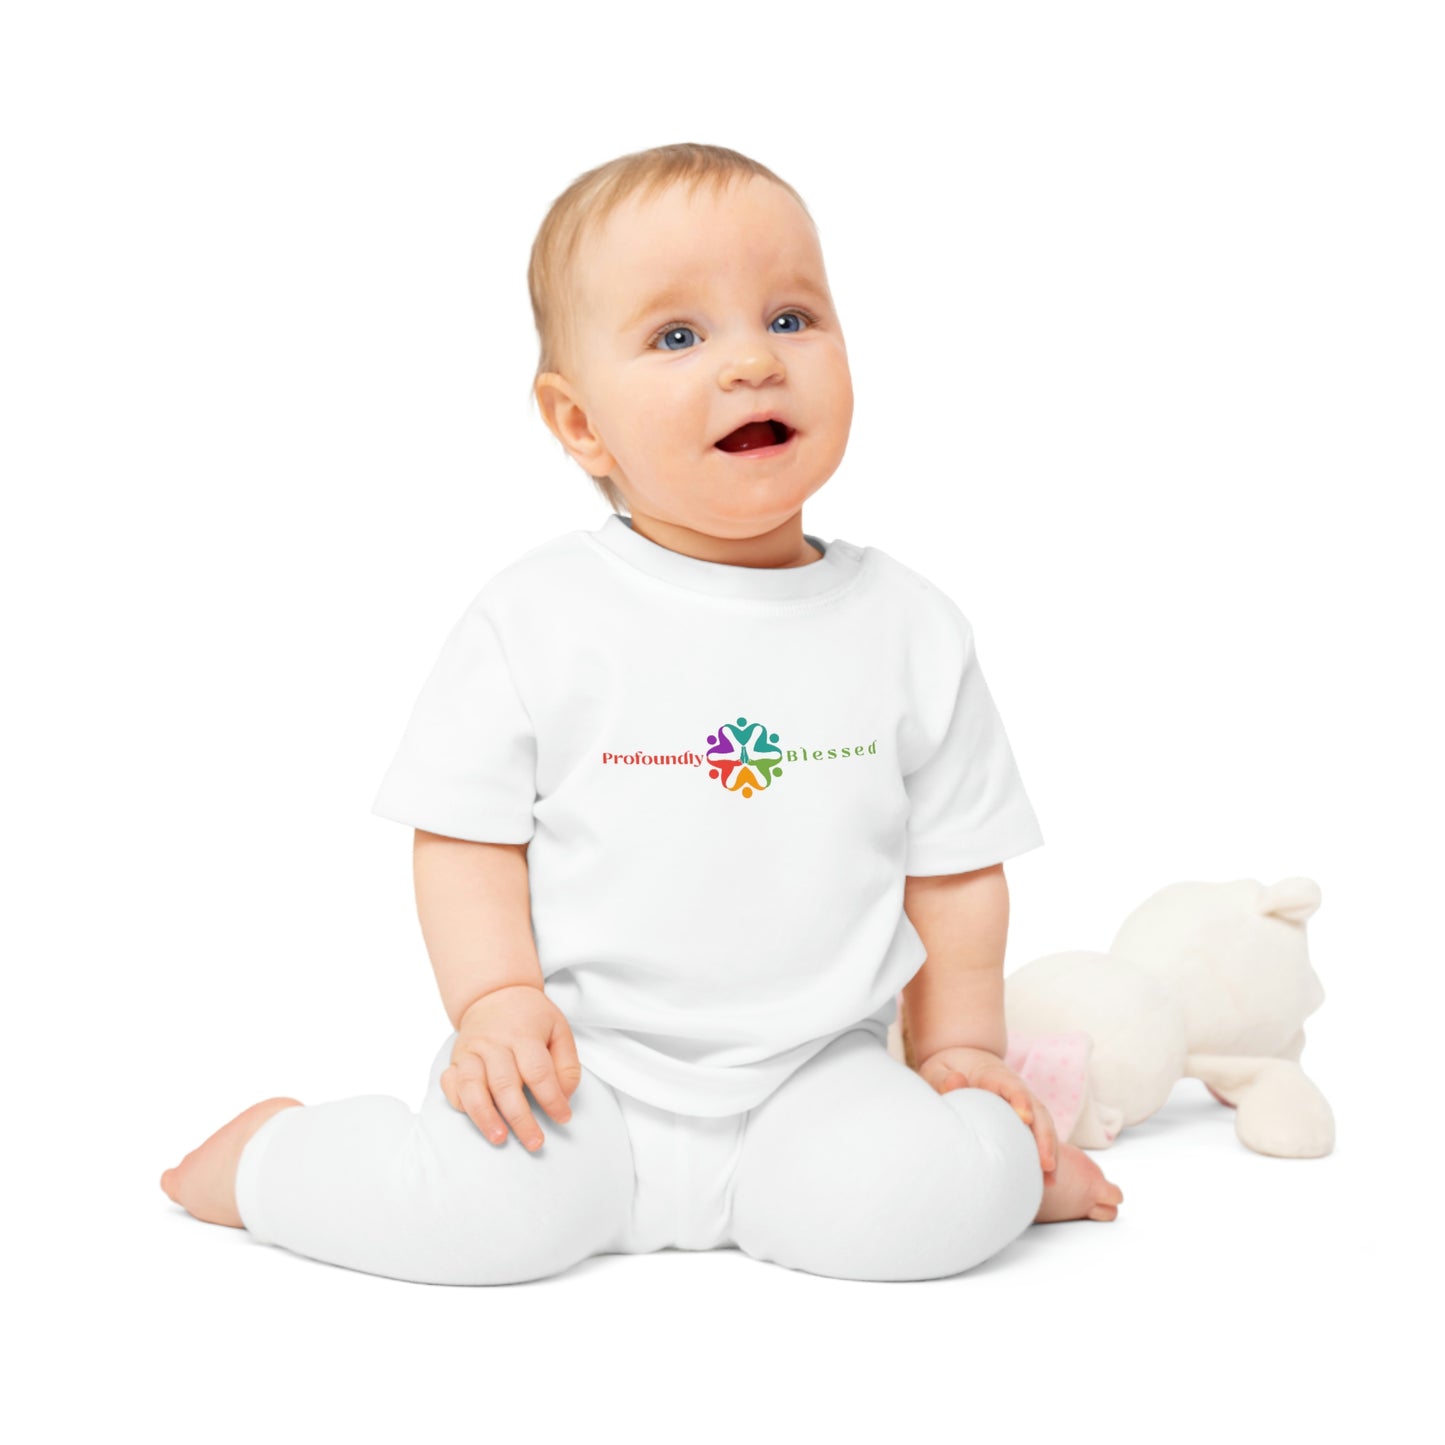 Profoundly Blessed Baby T-Shirt